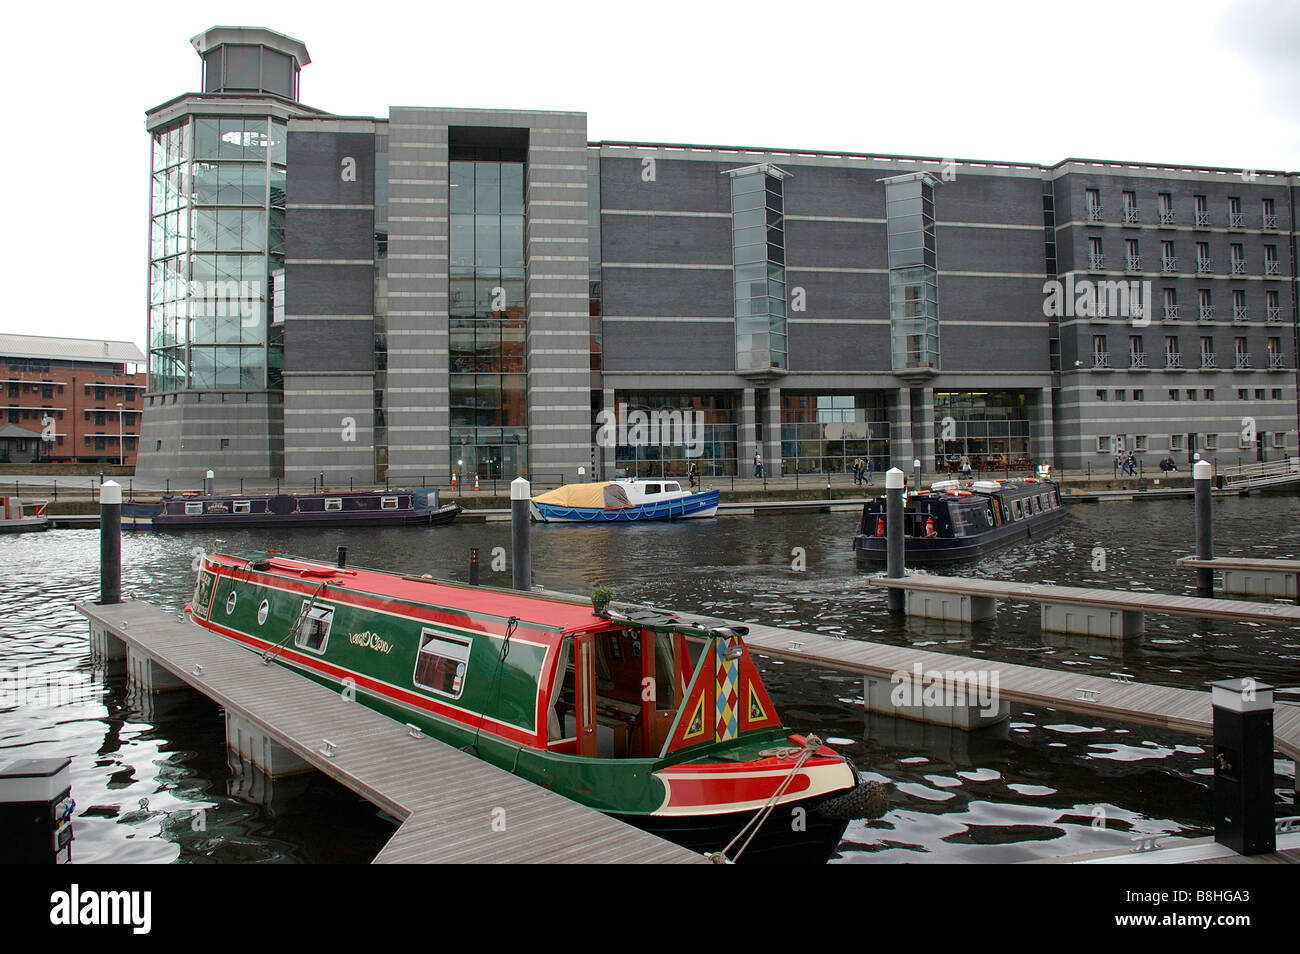 Royal Armouries, Clarence Drive, Clarence Dock, Leeds, nello Yorkshire, Inghilterra, Regno Unito, Europa Foto Stock